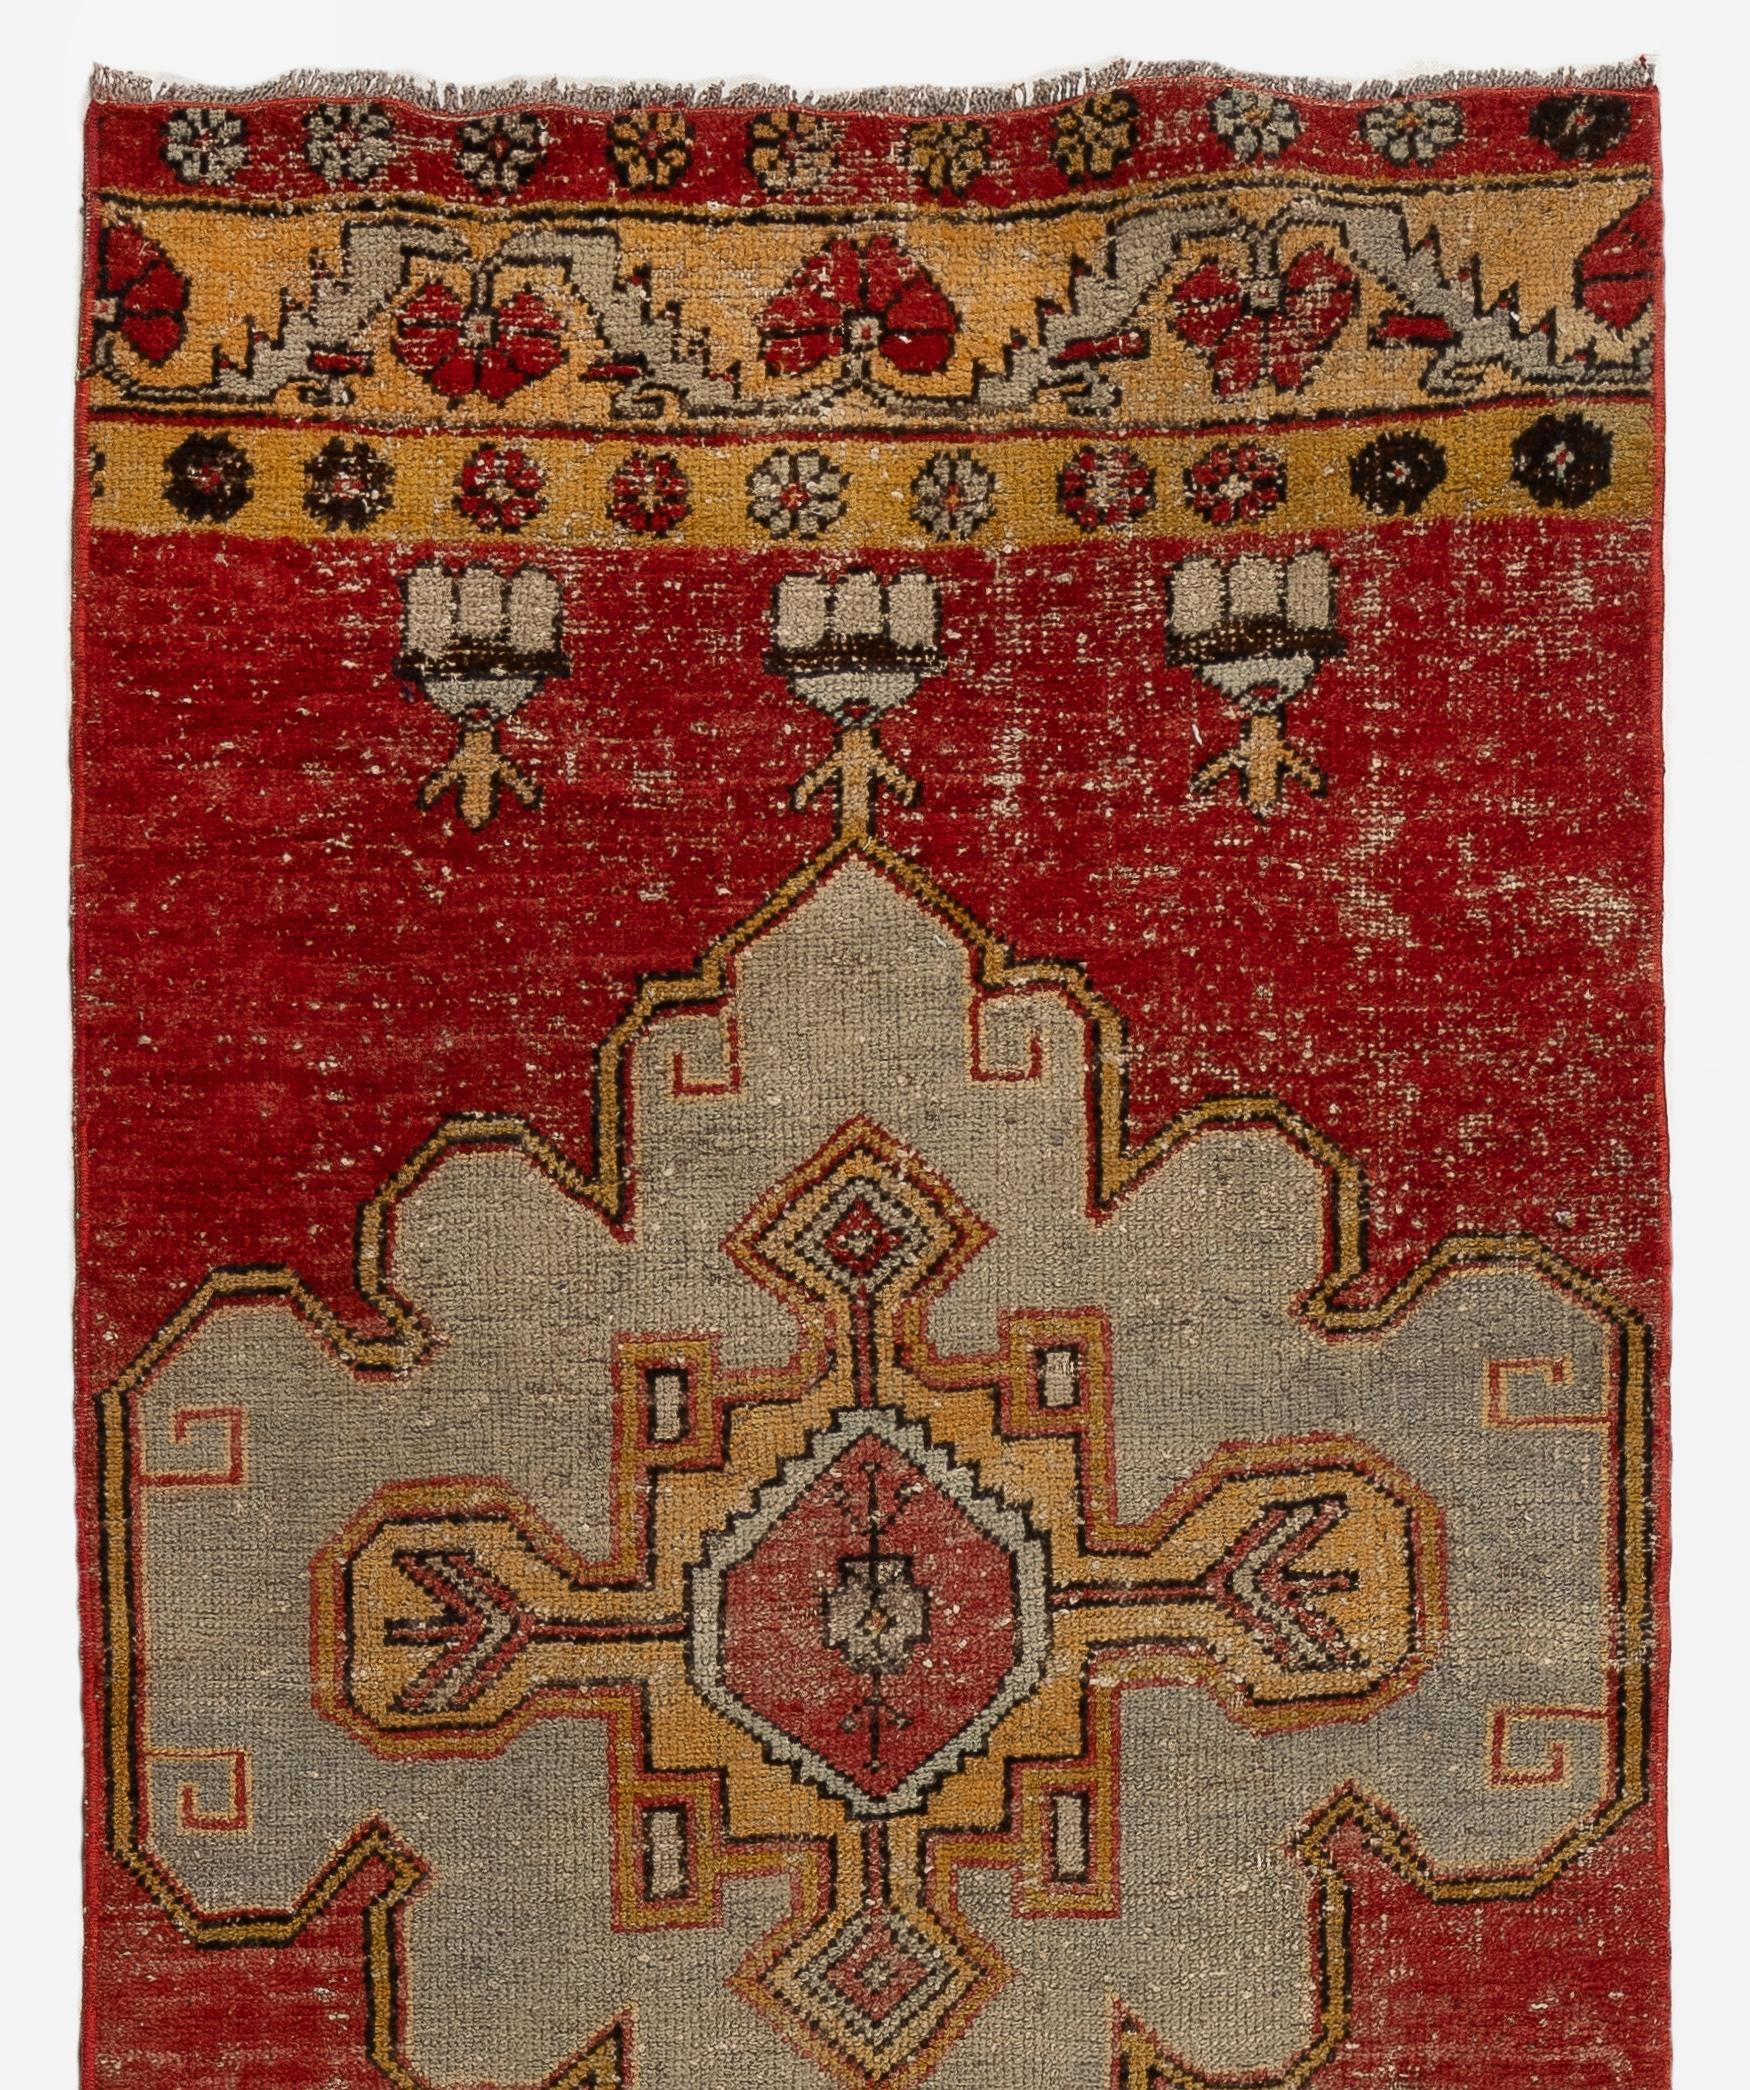 Vintage Turkish runner rug that features a lovely design of floral shaped multiple medallions in light blue and gold against a beautiful plain background in striated red as well as intricate top and bottom borders in goldenrod yellow decorated with